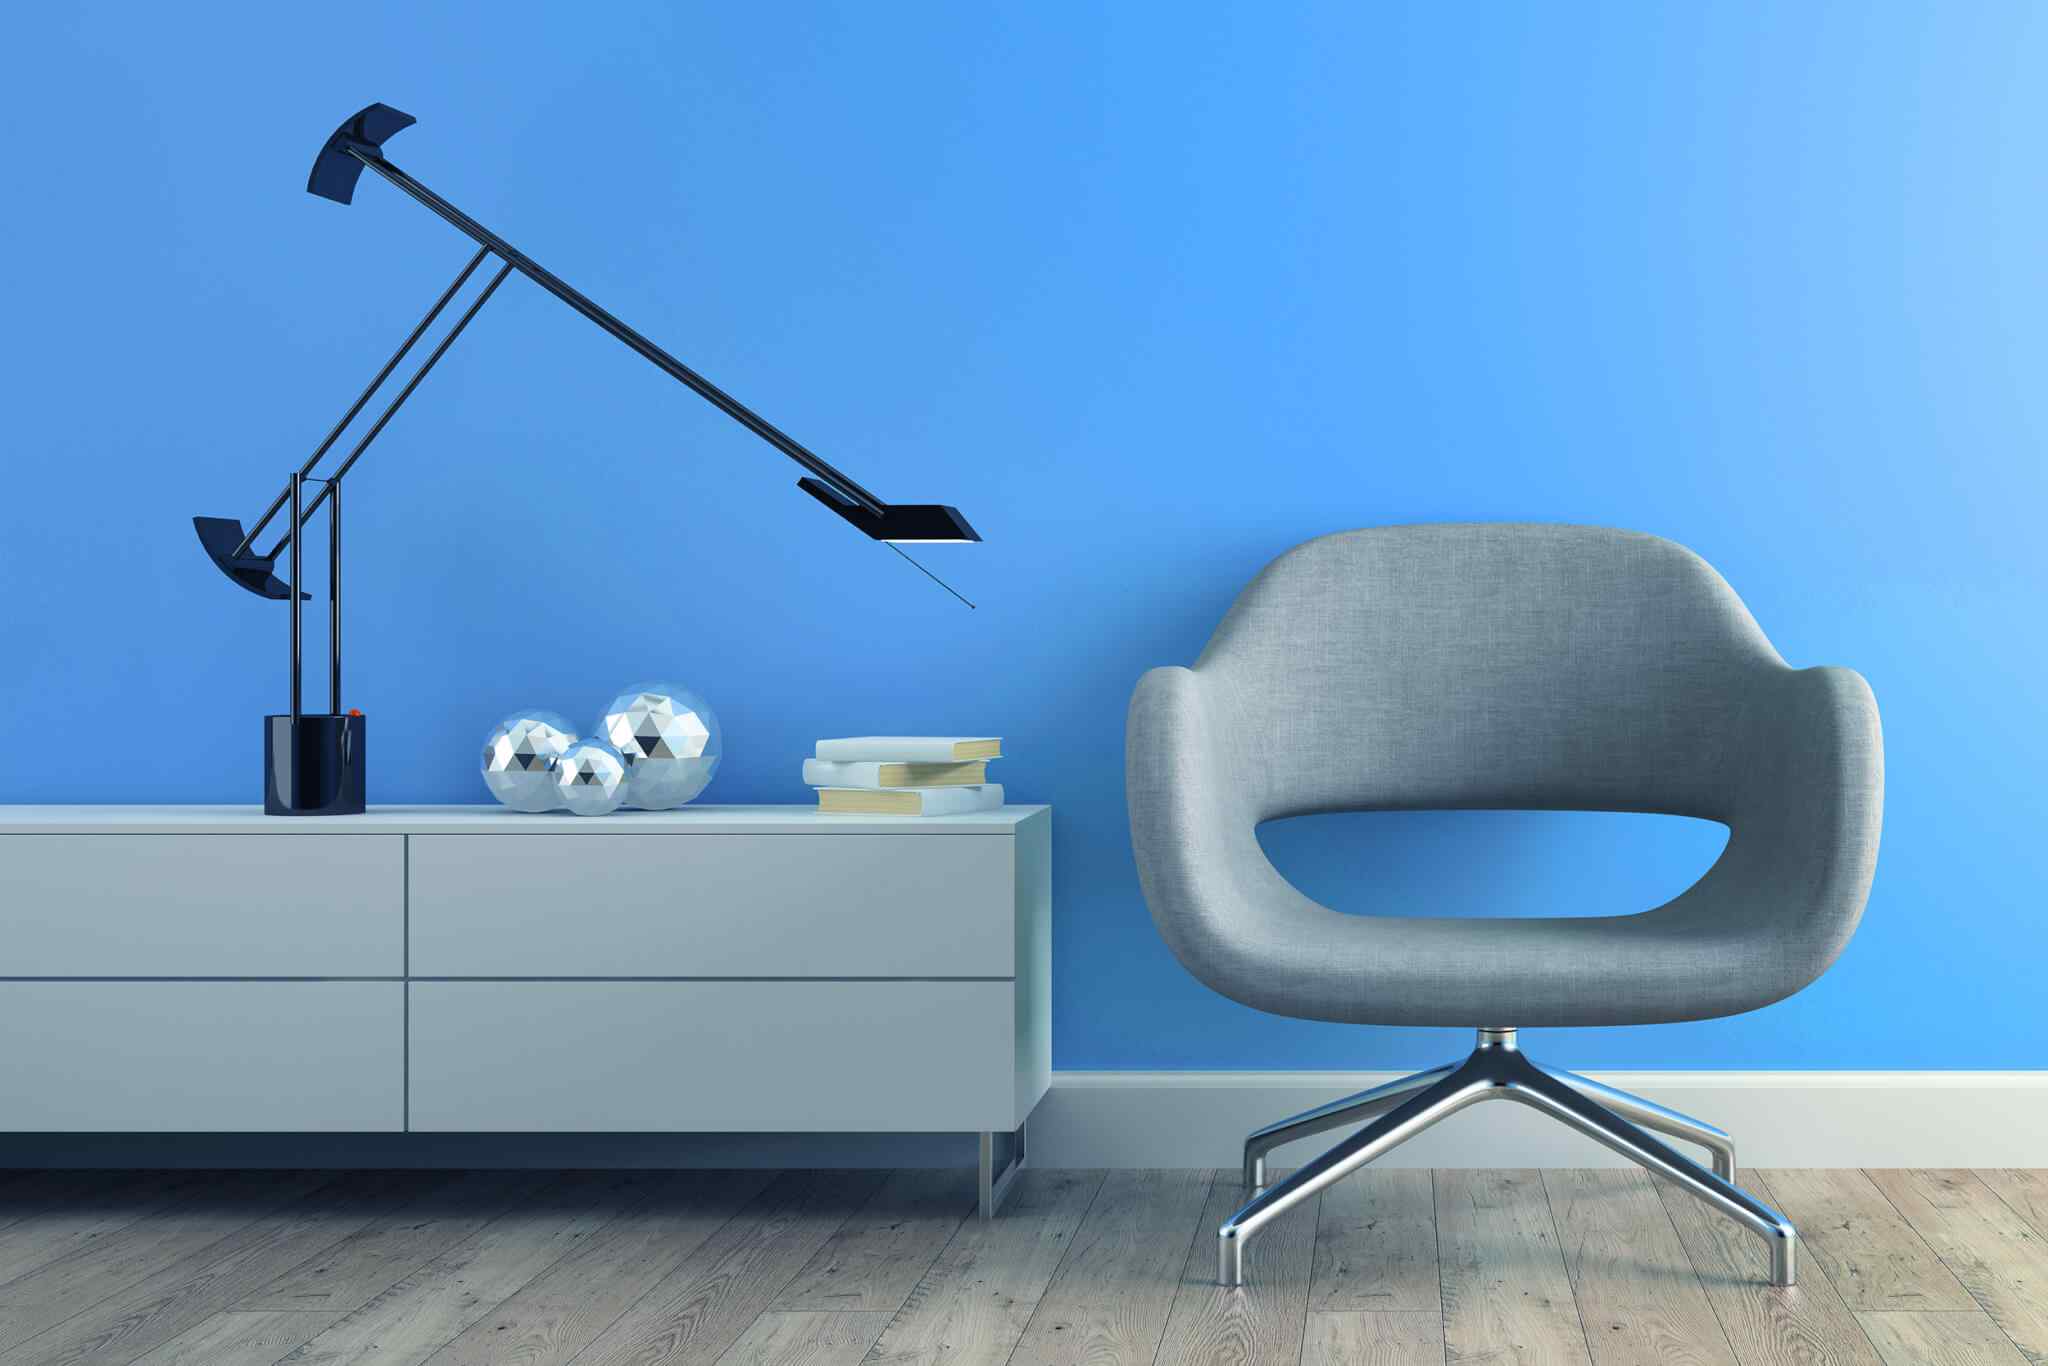 https://brbhomes.ie/wp-content/uploads/2017/05/image-chair-blue-wall.jpg